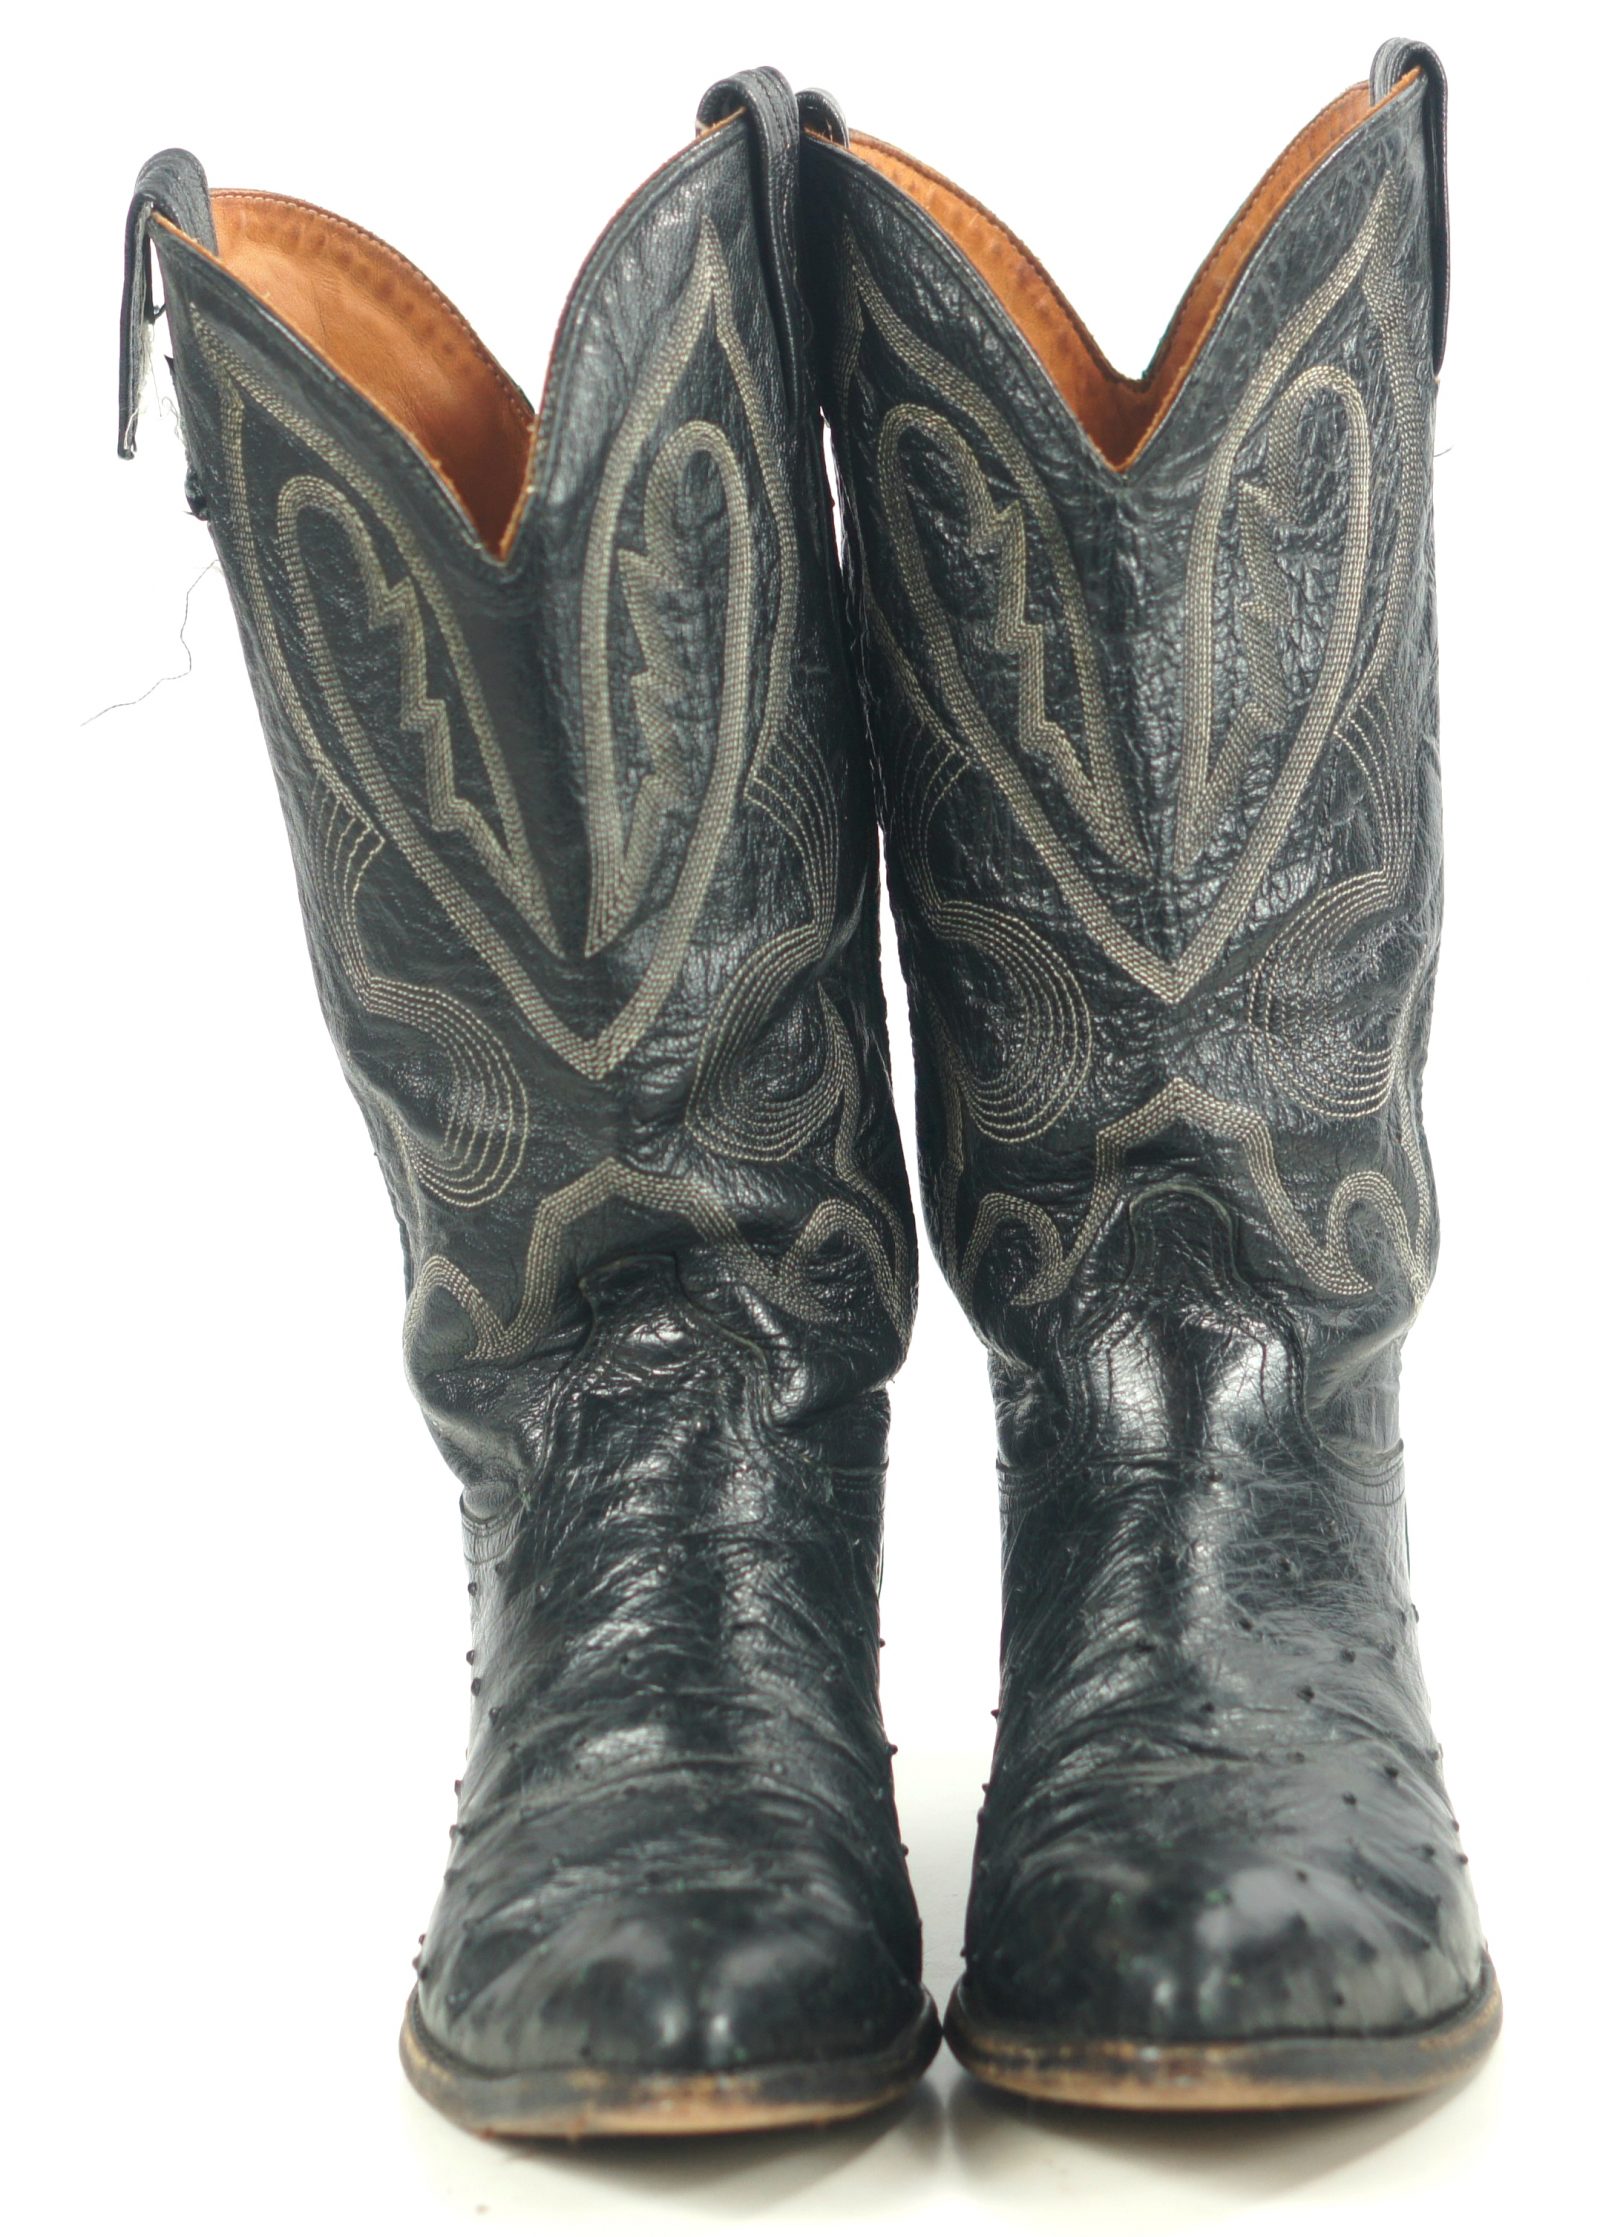 J Chisholm Black Full Quill Ostrich Cowboy Boots Vintage US Handcrafted ...